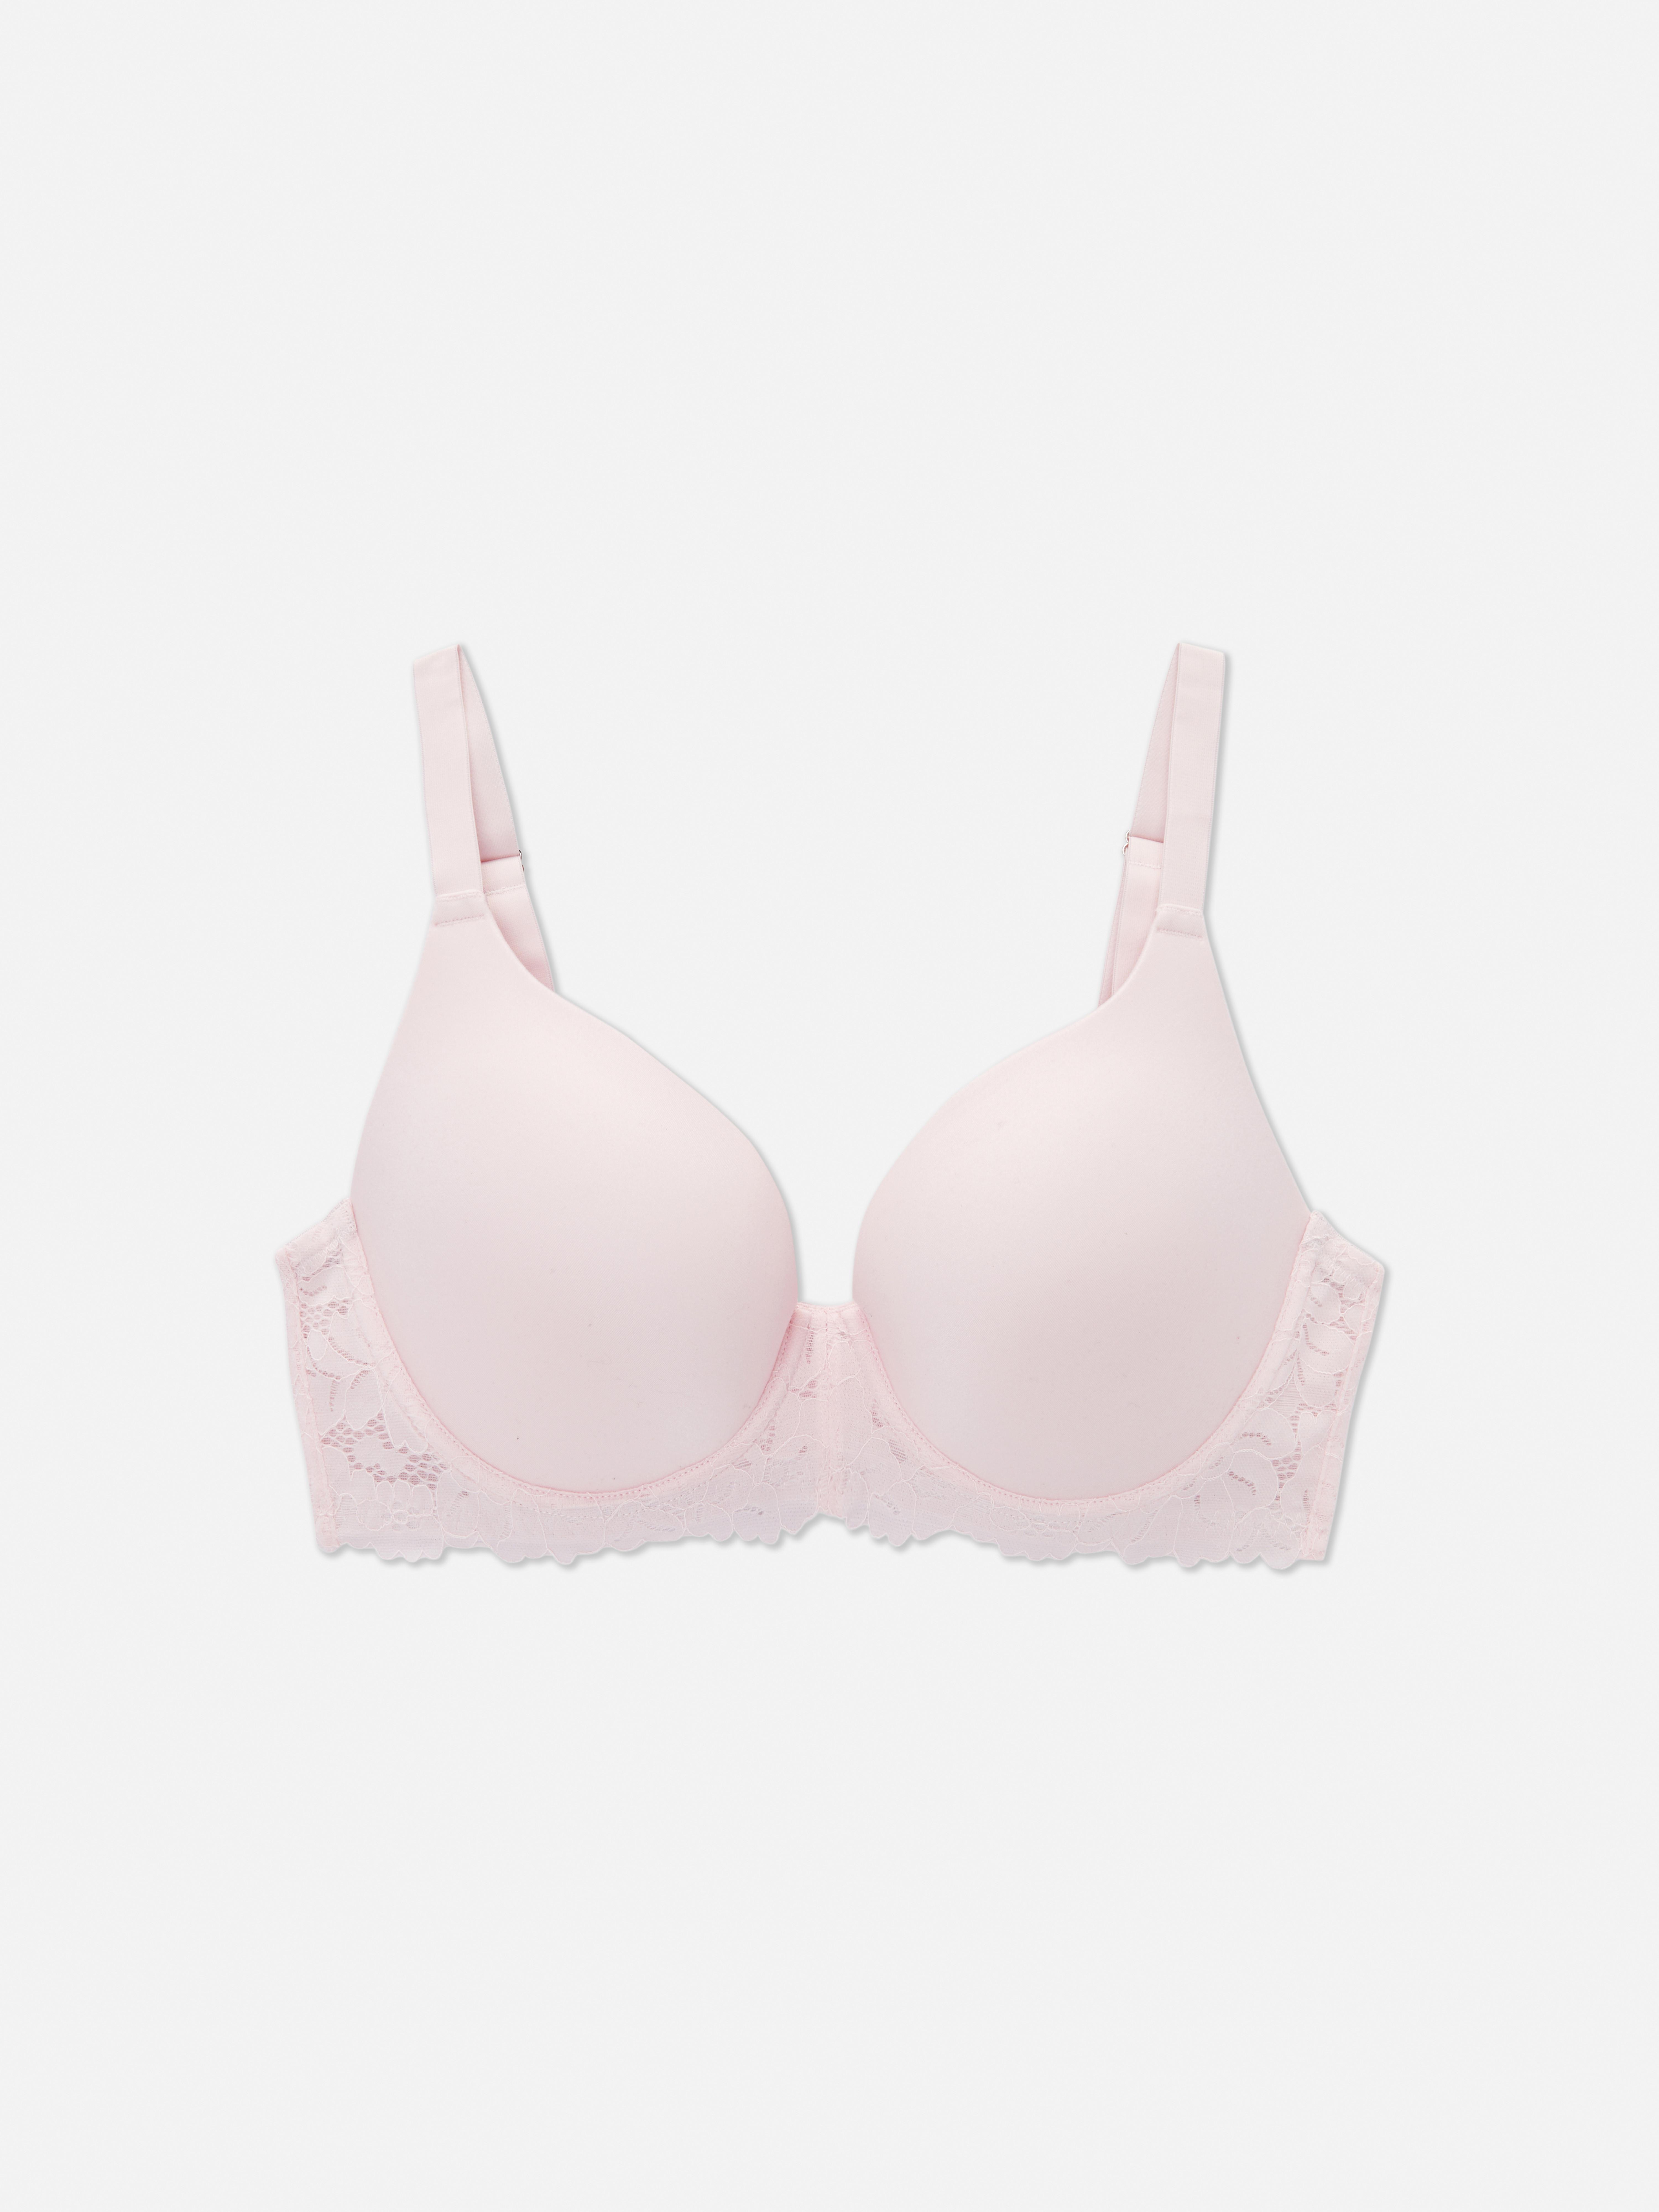 PRIMARK MAXIMISE+2 CUP SIZES FABULOUSLY SEXY PINK LACE + SPARKLING DIAMANTE  BRA